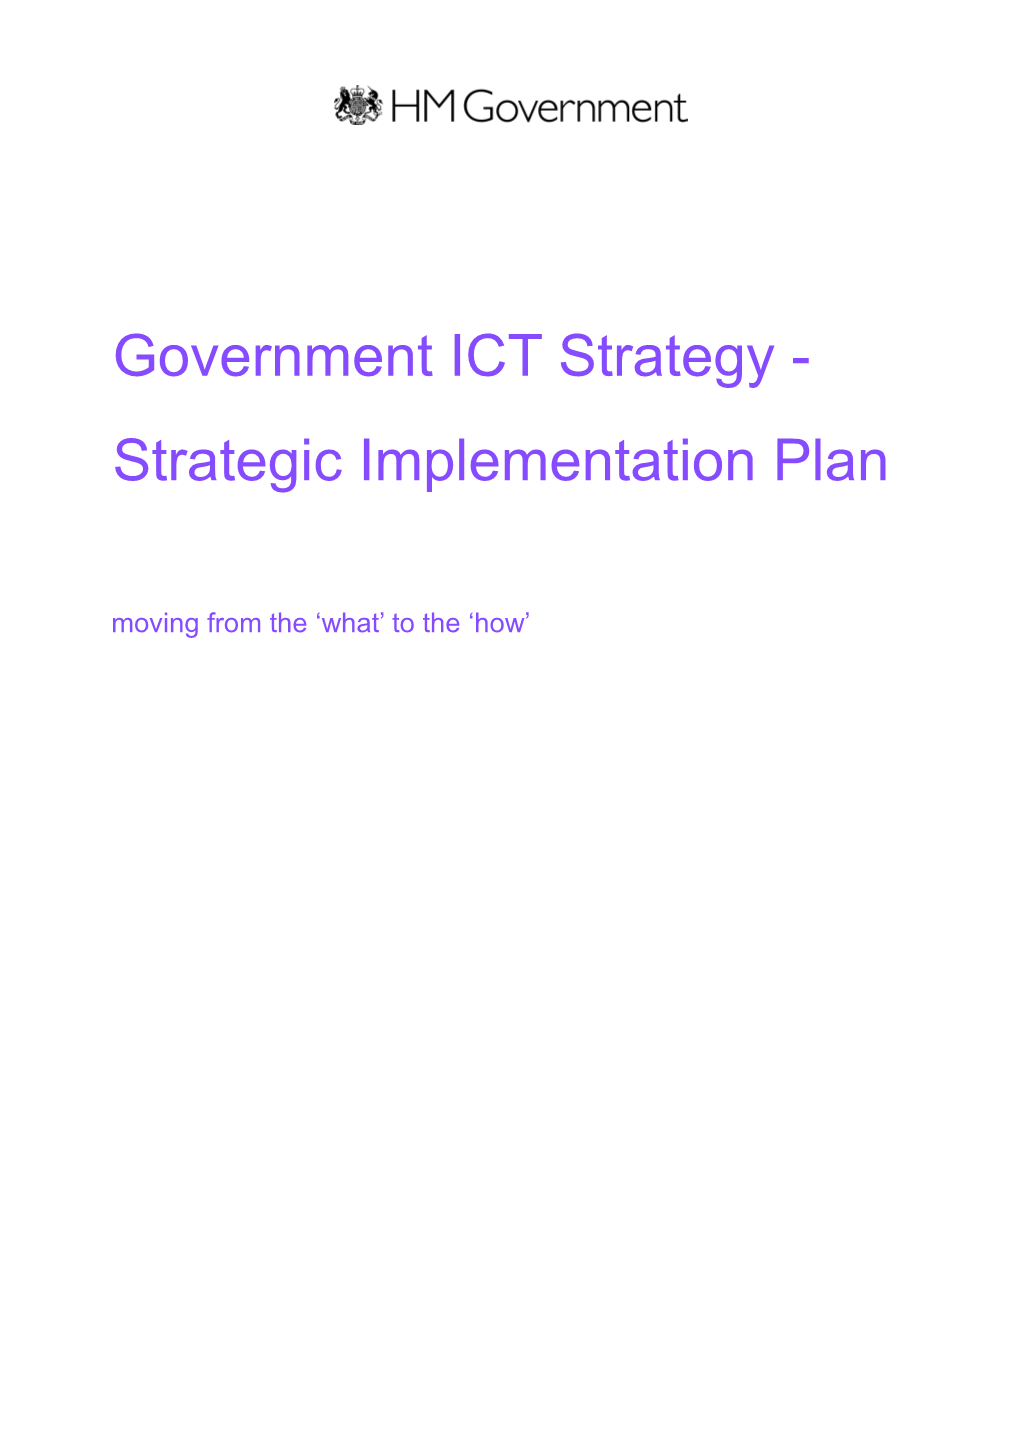 Government ICT Strategy - Strategic Implementation Plan